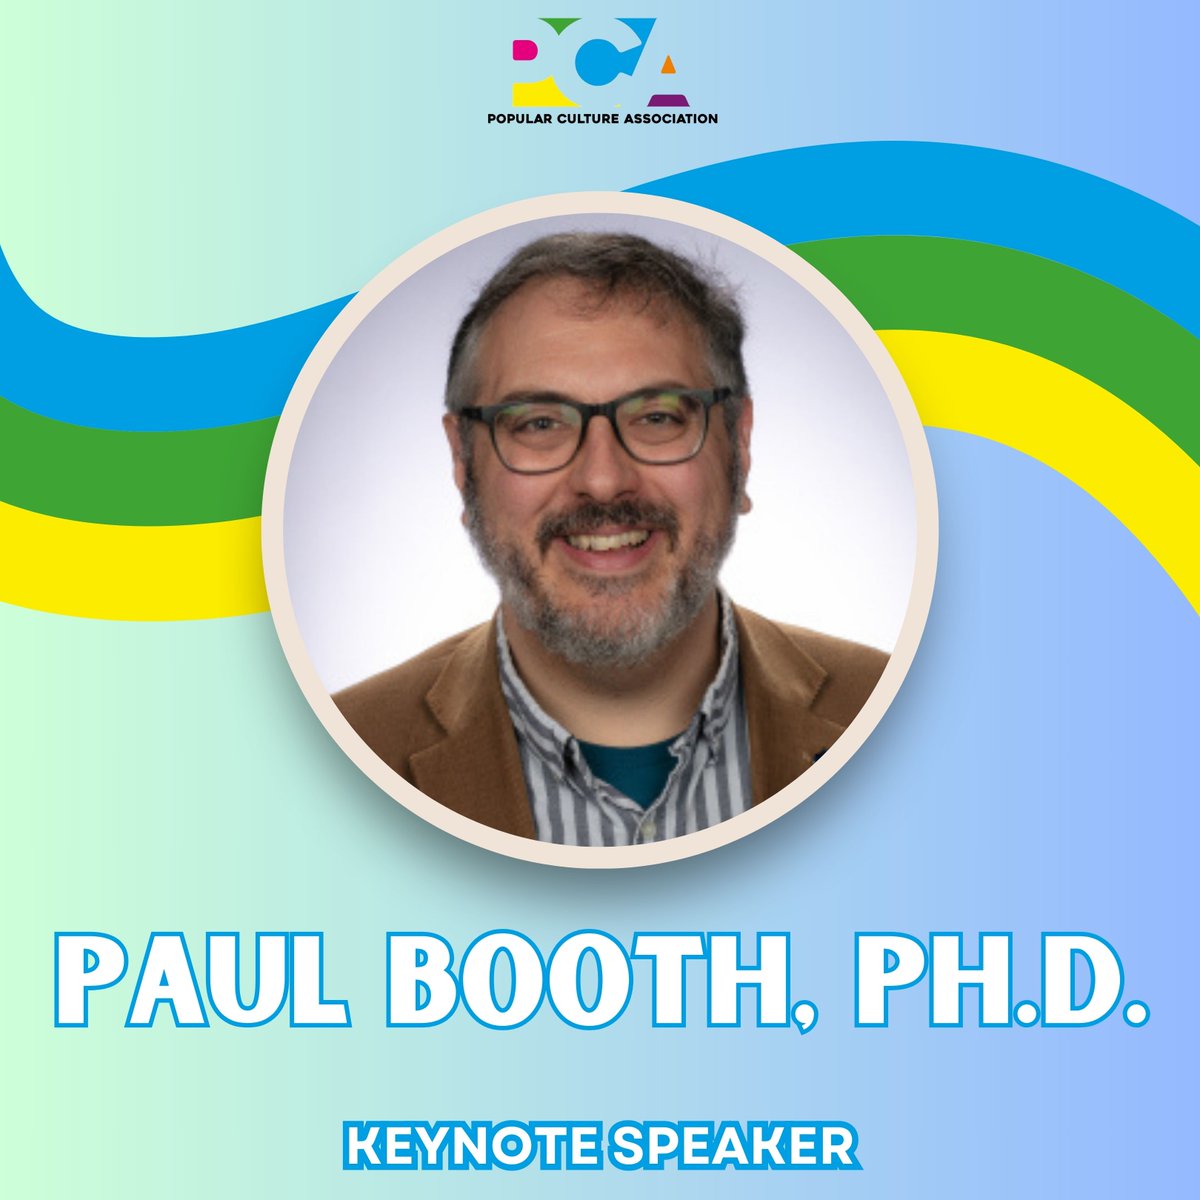 Join us for a keynote session with Dr. Paul Booth, a professor of Media and Pop Culture in the College of Communication and Associate Dean of Student Affairs and Engagement. Explore his knowledge as he presents on Thursday, March 28th at 4:45 PM in Chicago Ballroom D. @pbooth81